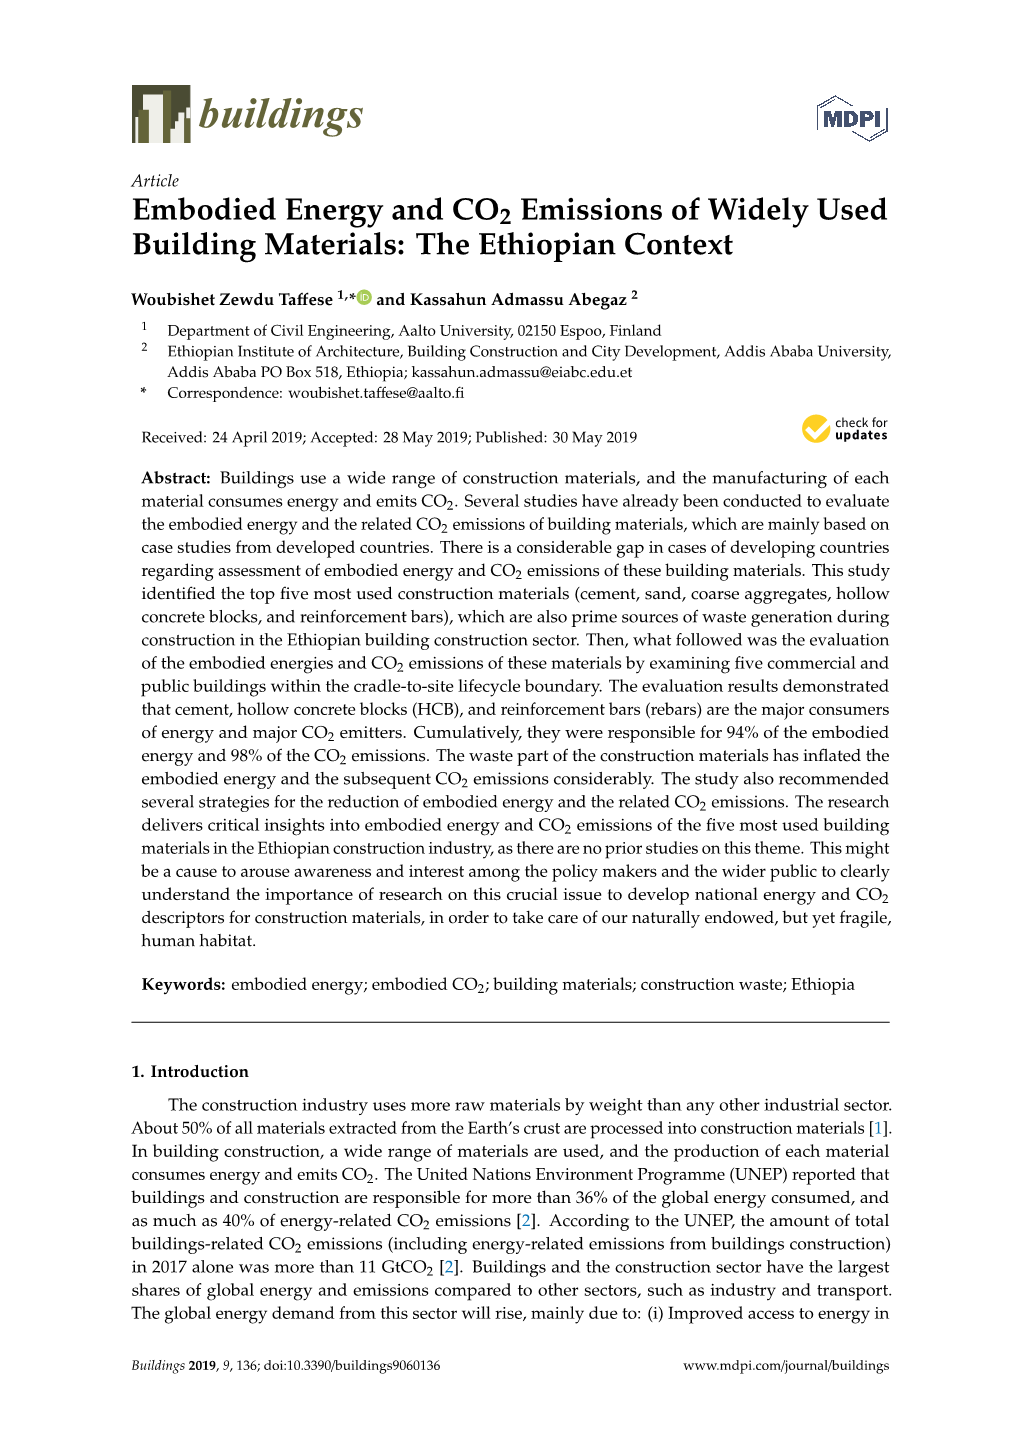 Embodied Energy and CO2 Emissions of Widely Used Building Materials: the Ethiopian Context